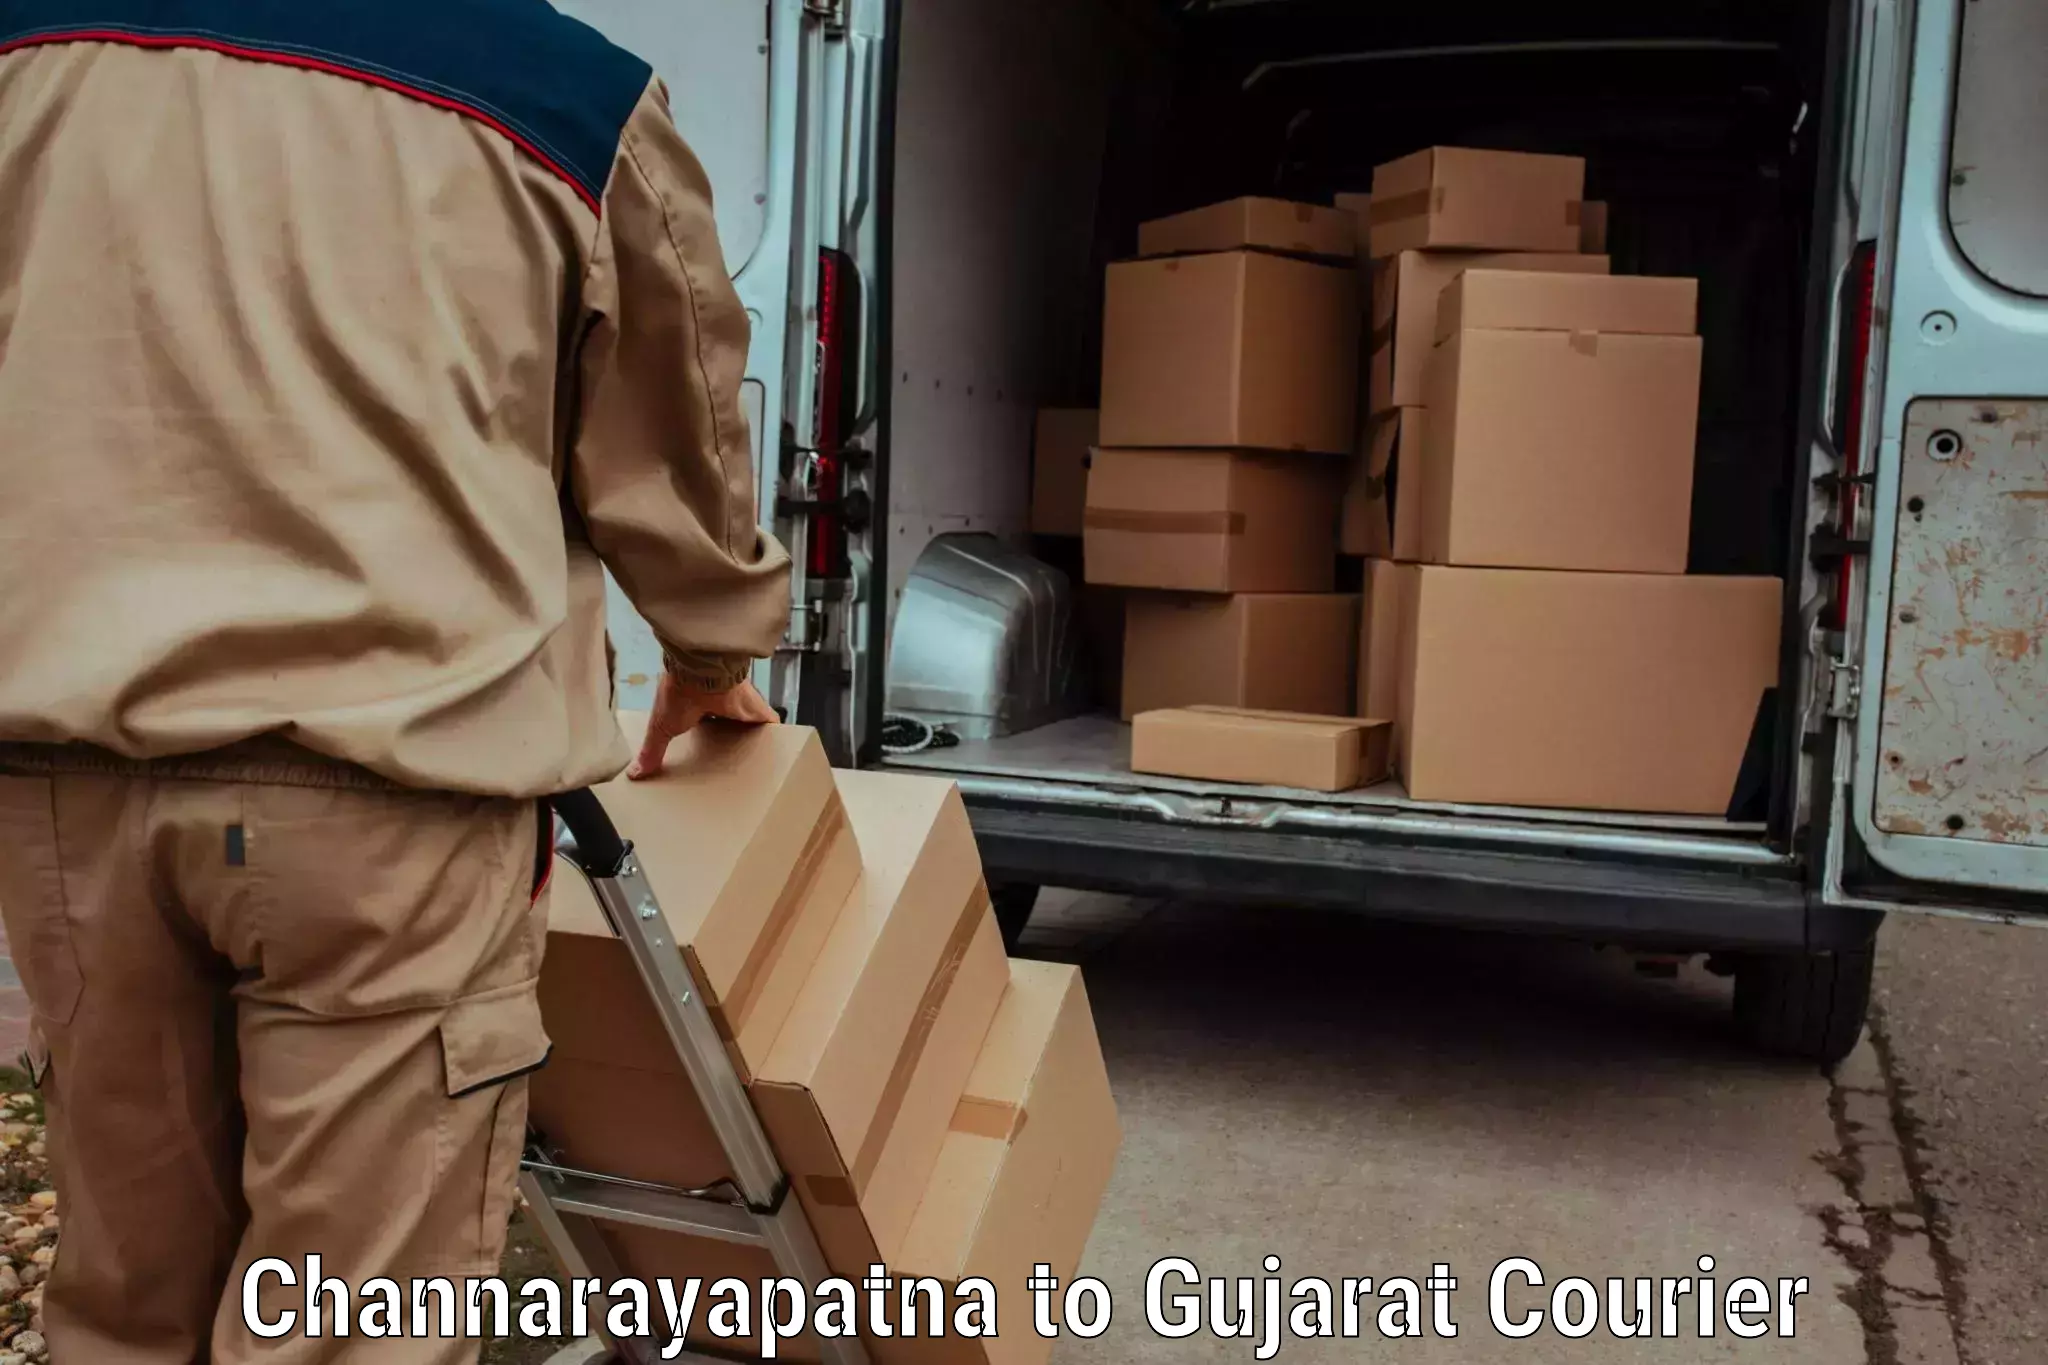 Overnight delivery services in Channarayapatna to Jetpur